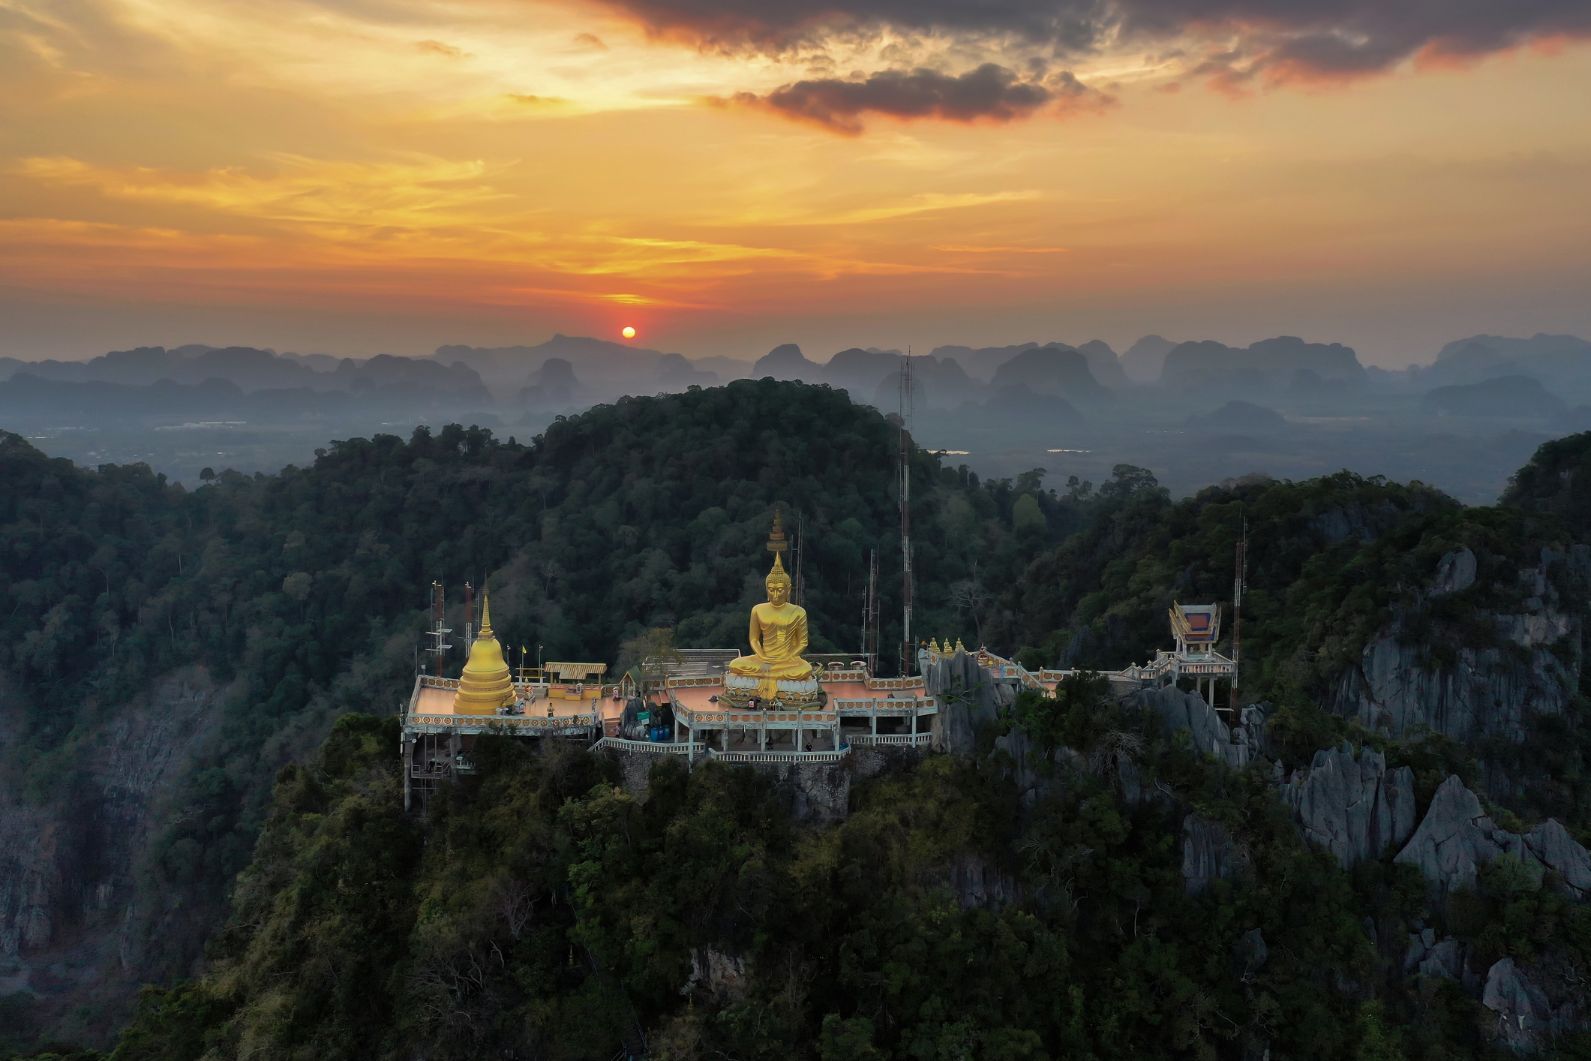 The sun sets over the remarkable Tiger Cave Temple in Krabi, Thailand